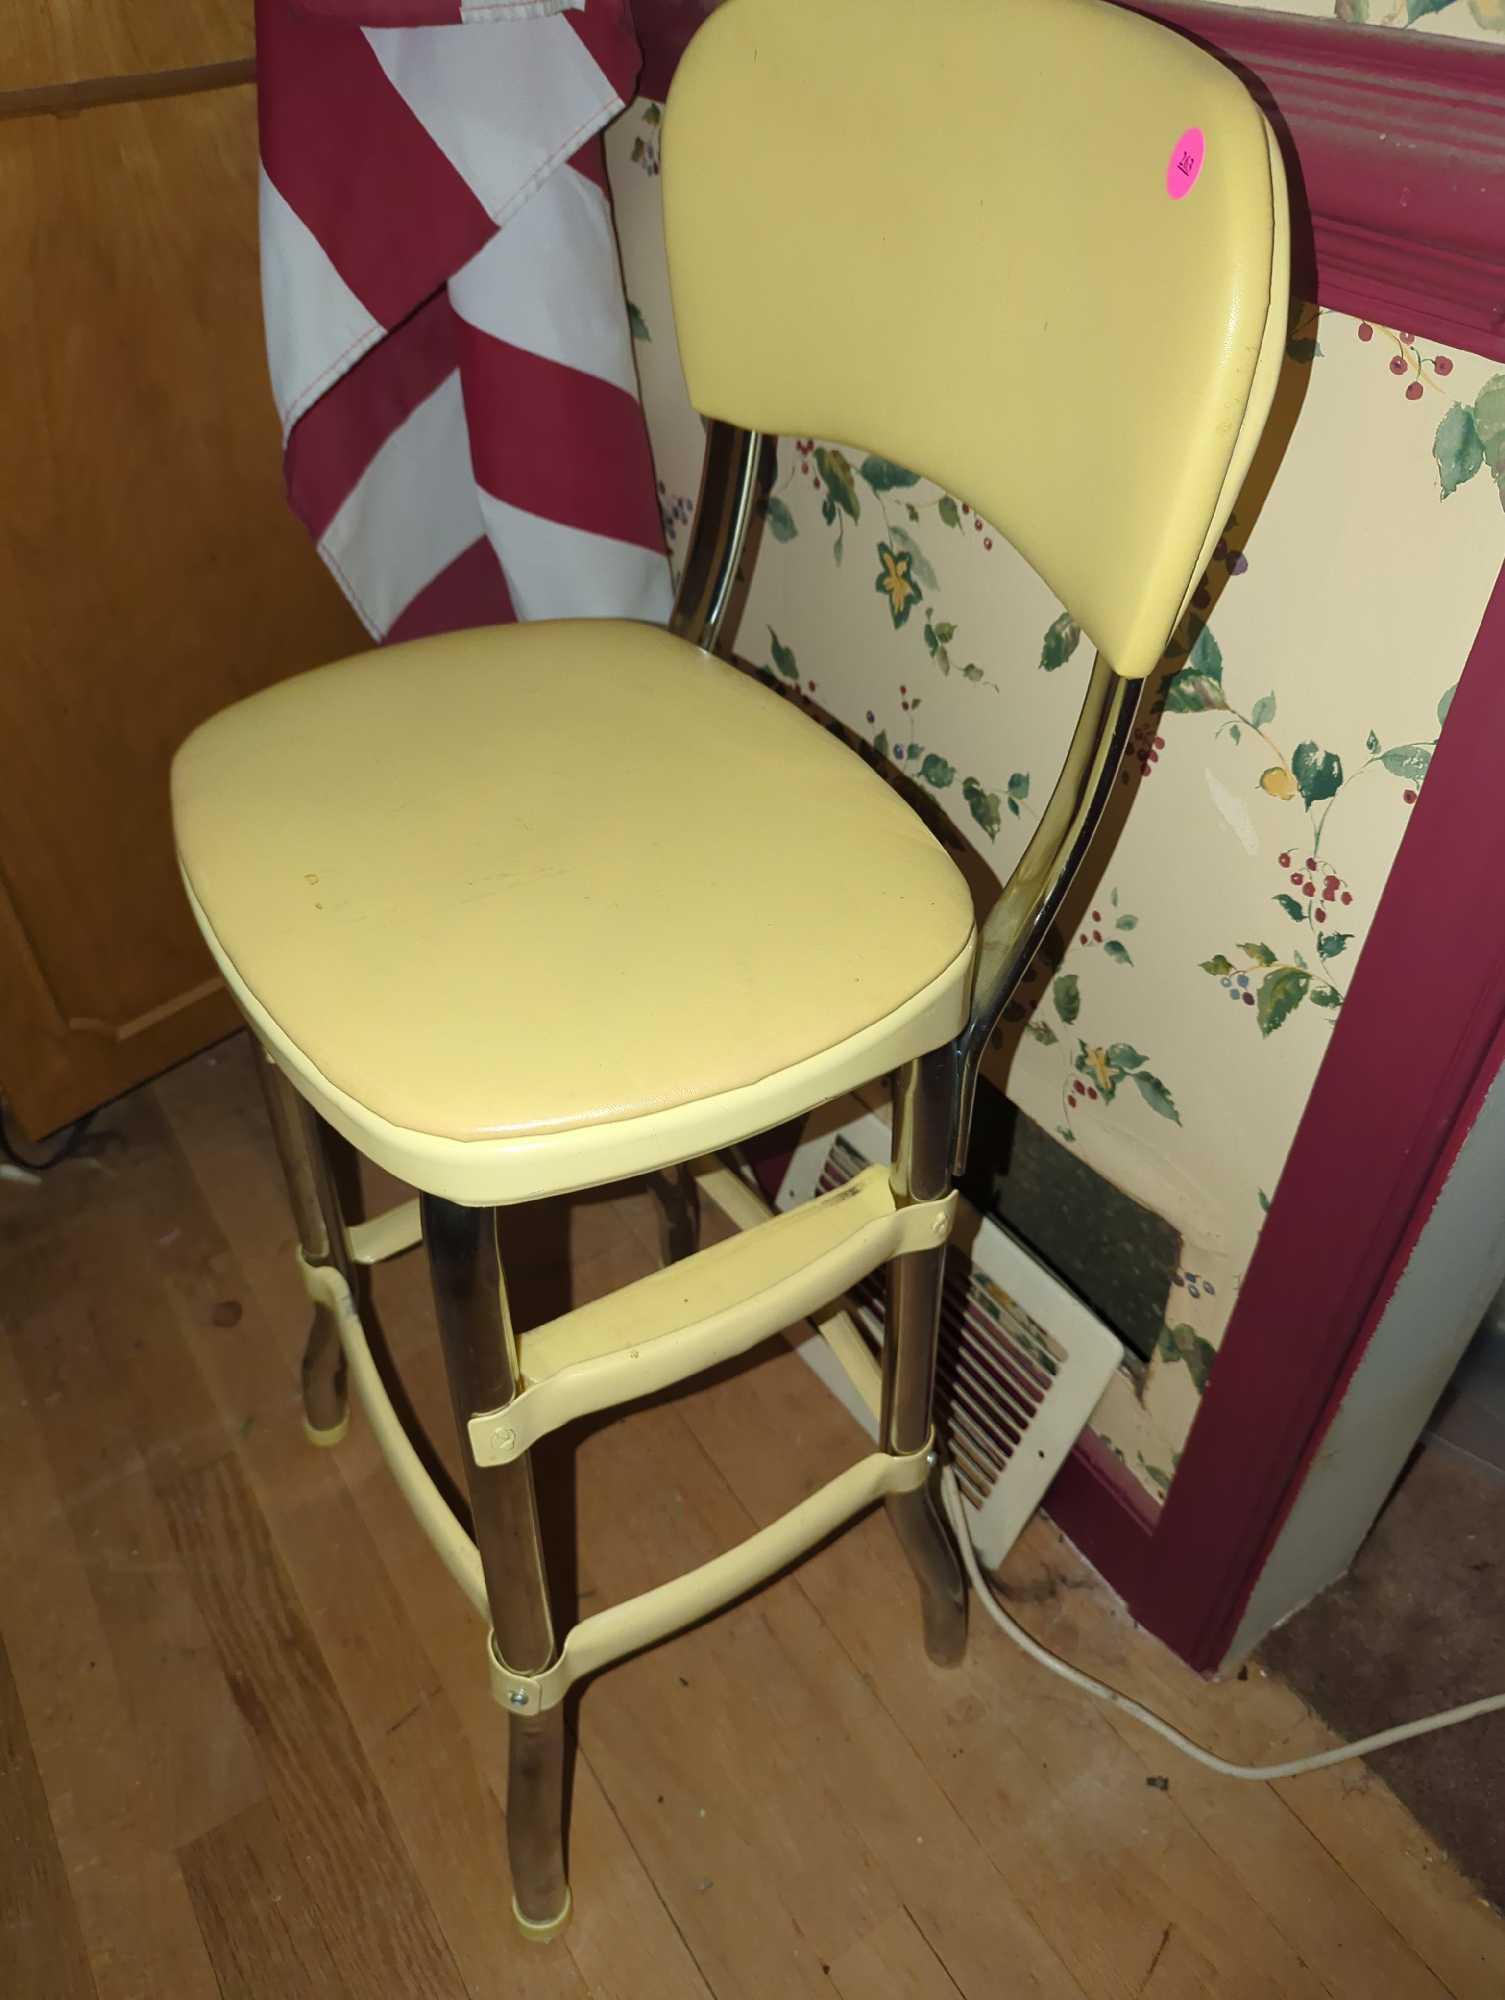 (DR) COSCO STYLAIRE HIGH CHAIR/STEP STOOL, MISSING STEPS, APPROXIMATE DIMENSIONS - 35" H X 16" W X